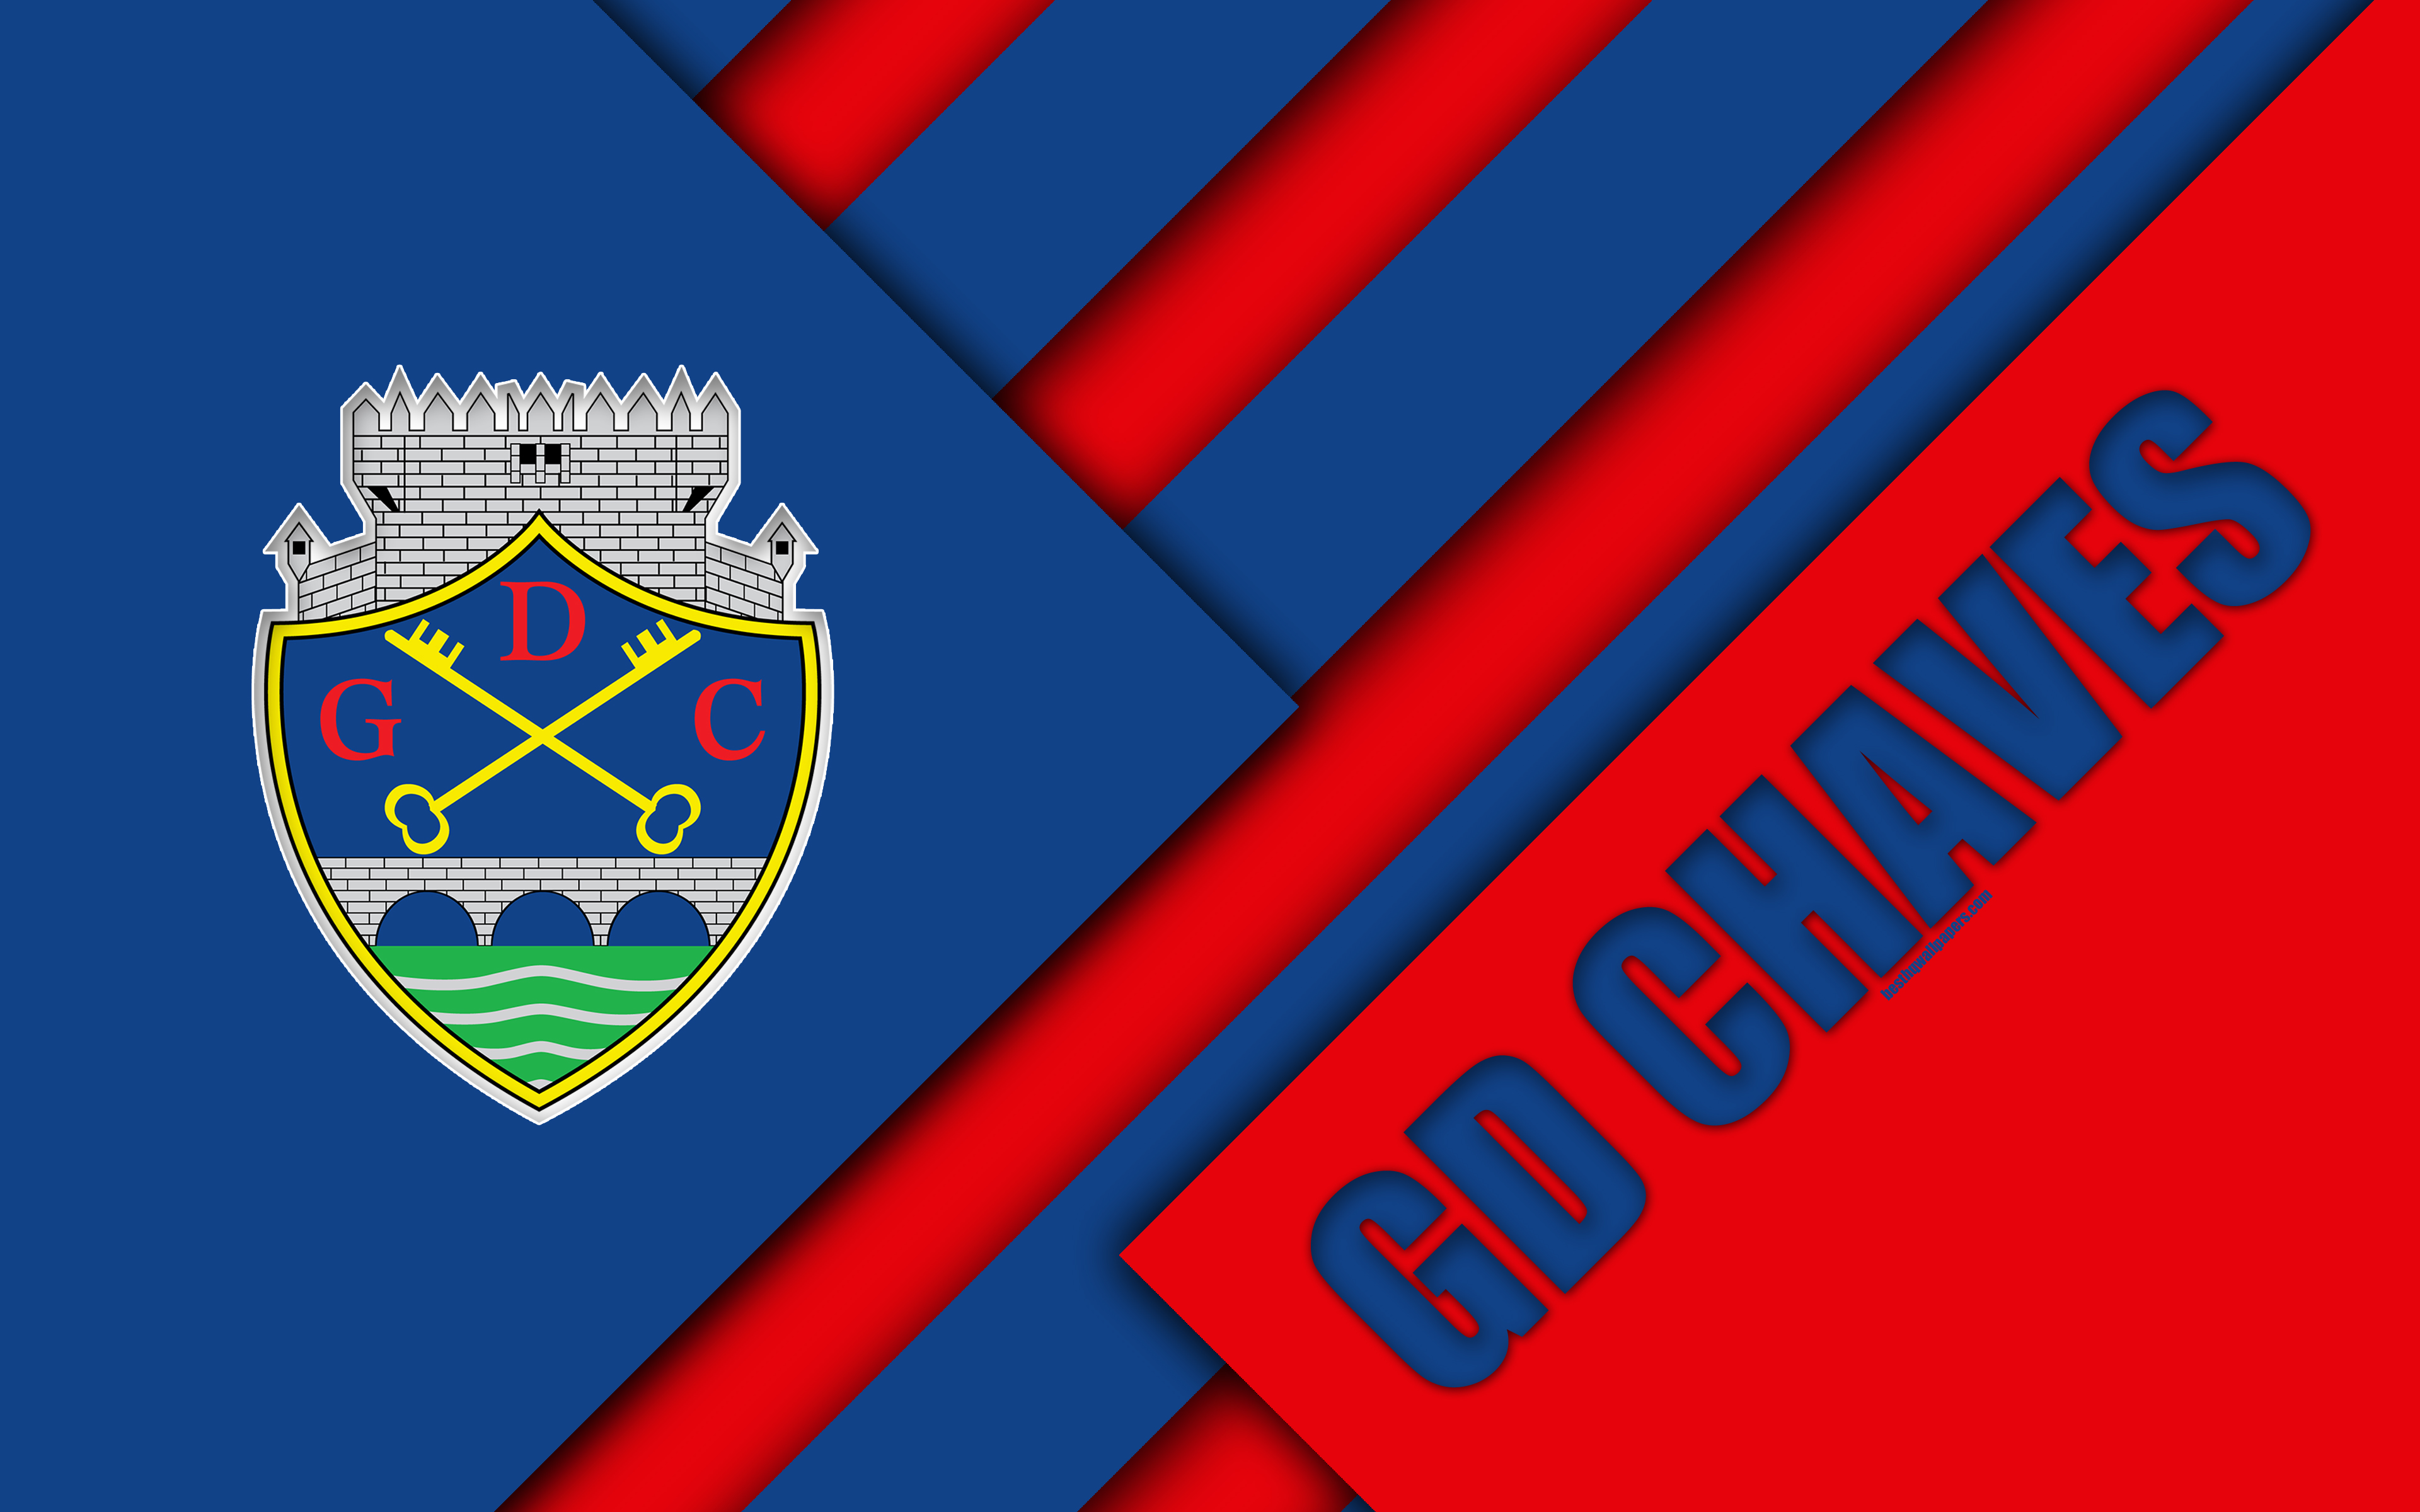 Gd Chaves, Blue Red Abstraction, Portuguese Football - G.d. Chaves , HD Wallpaper & Backgrounds